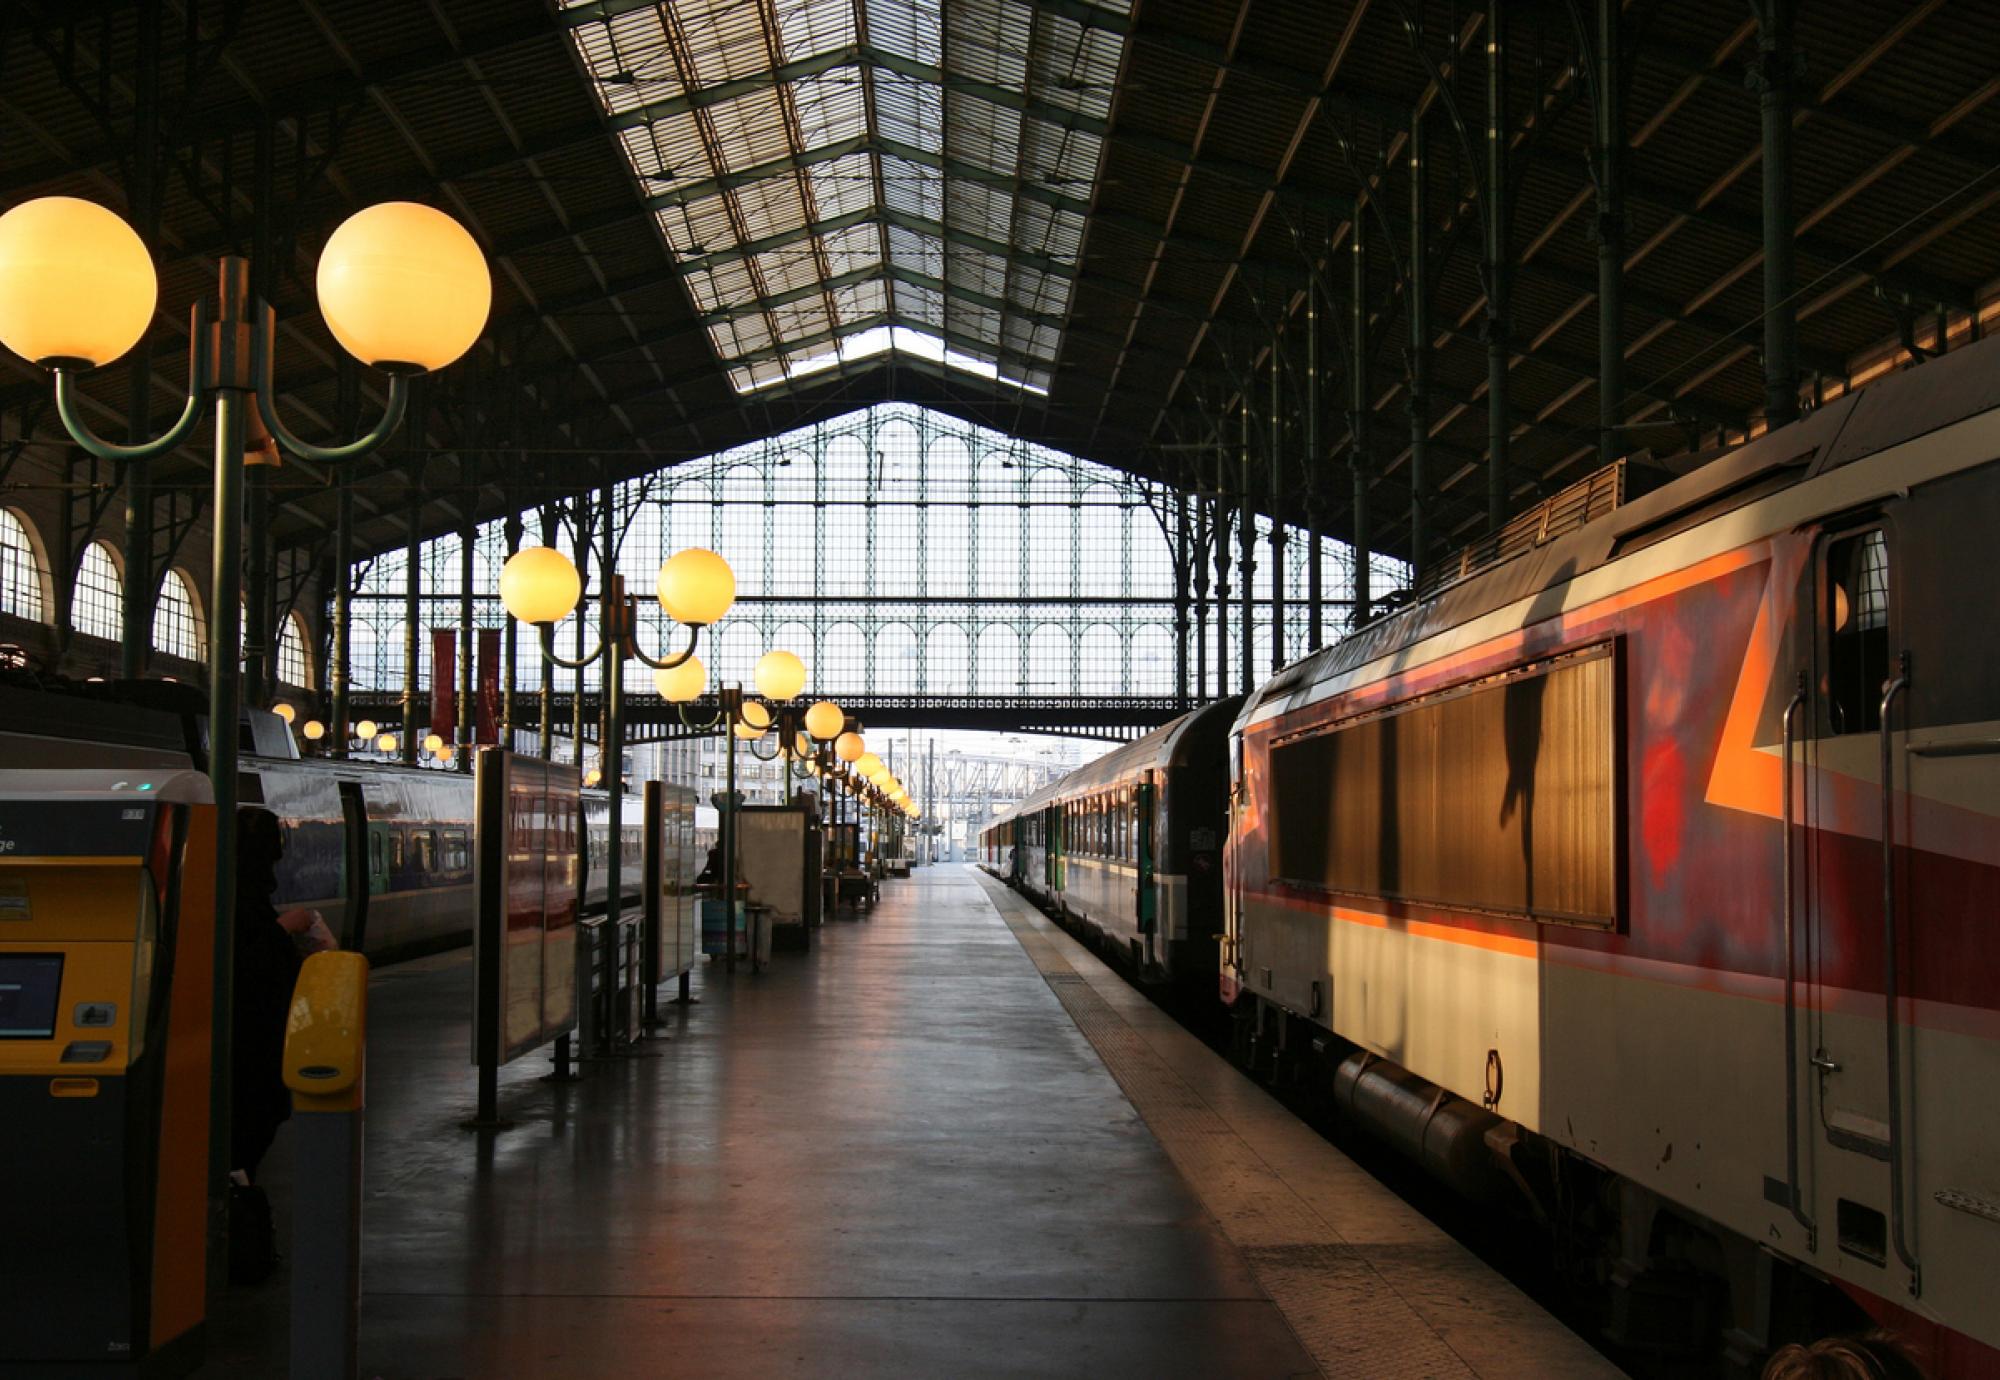 Evolyn to launch Paris to London route in competition with Eurostar